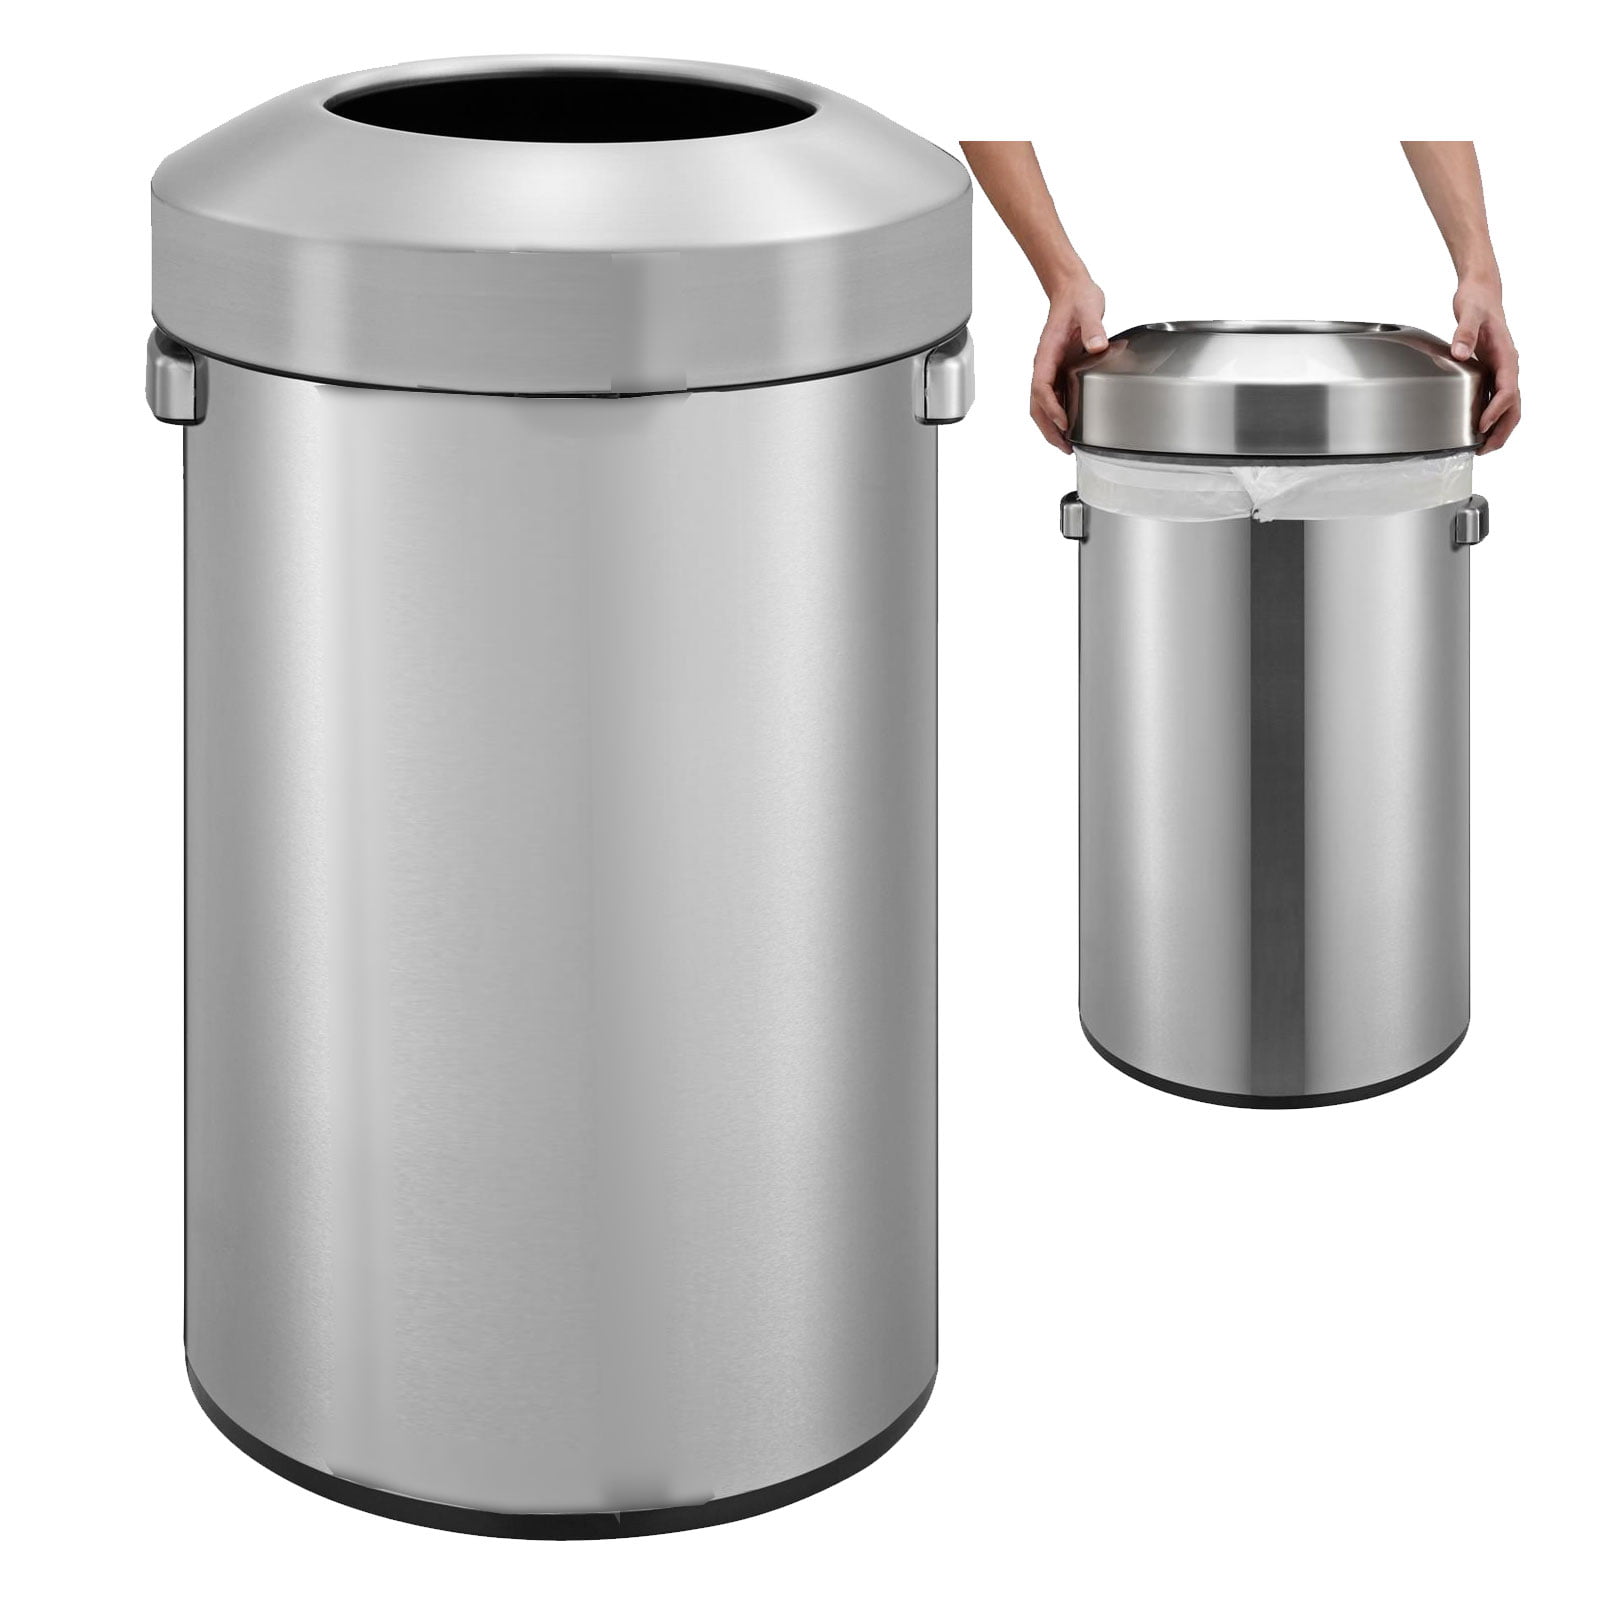 TEXAS RAGTIME Stainless Steel Trash Can with Open Lid, 24 Gallon, for Stainless Steel Kitchen Garbage Can With Lid